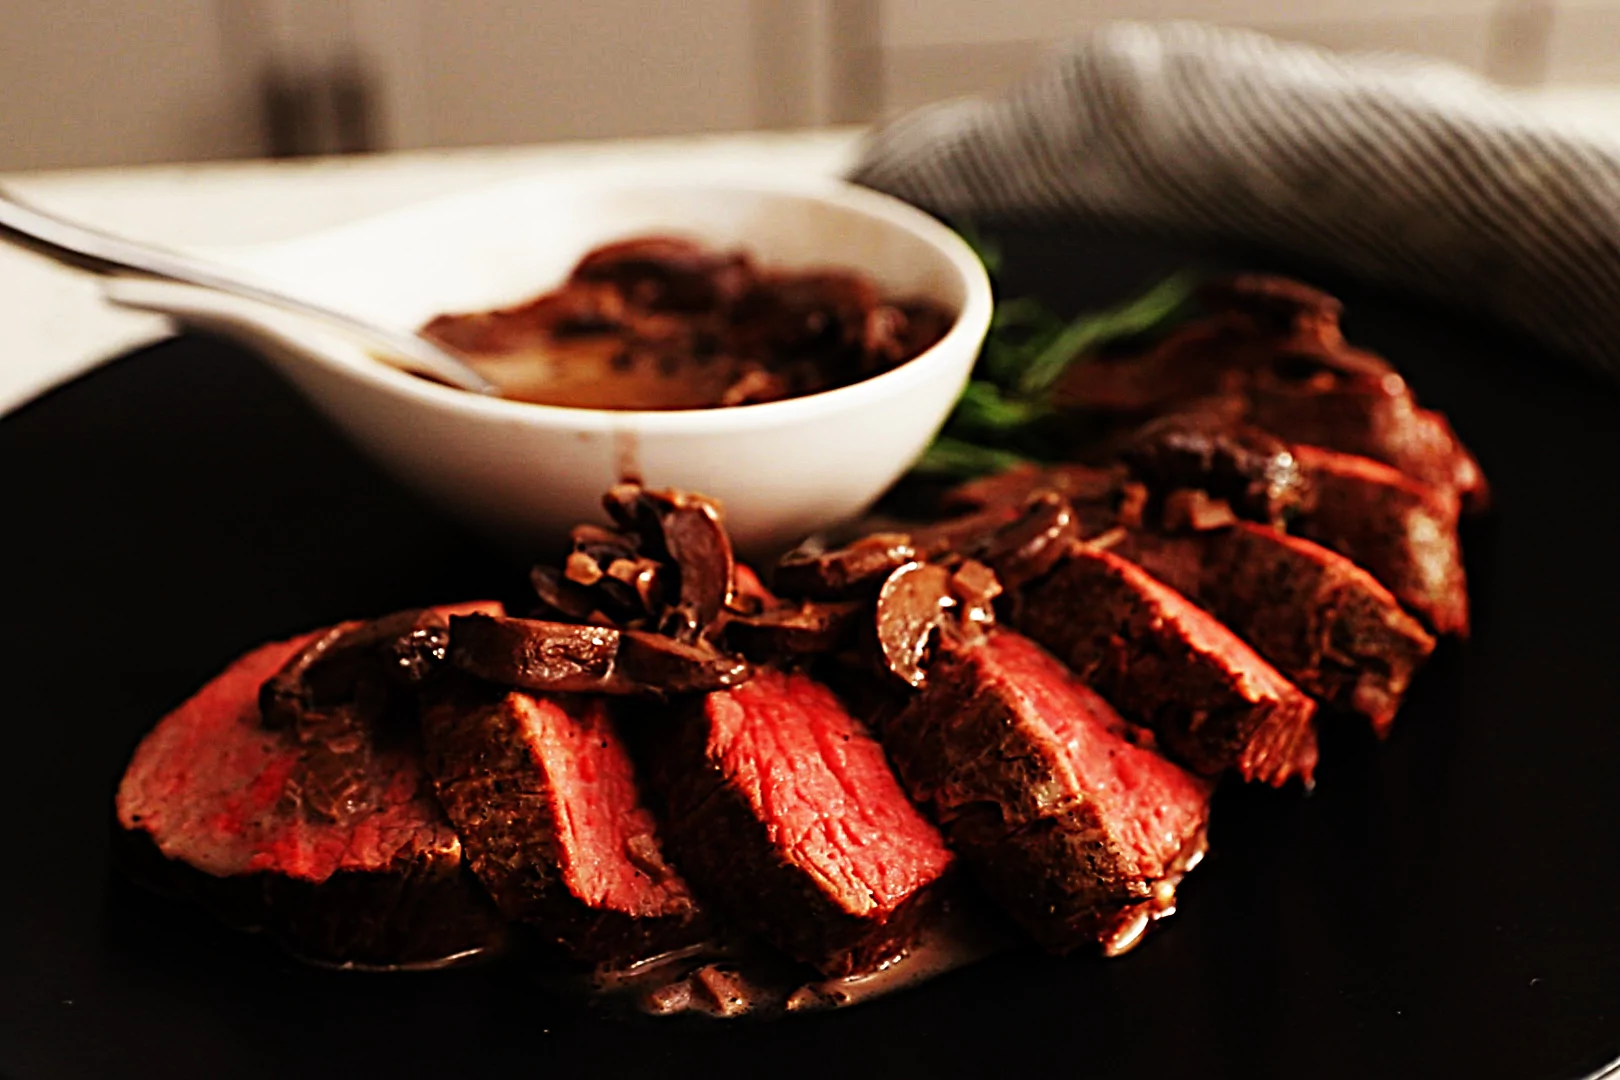 Stupid-Easy Recipe for Chateaubriand Steaks with Mushroom Red Wine Sauce (#1 Top-Rated)